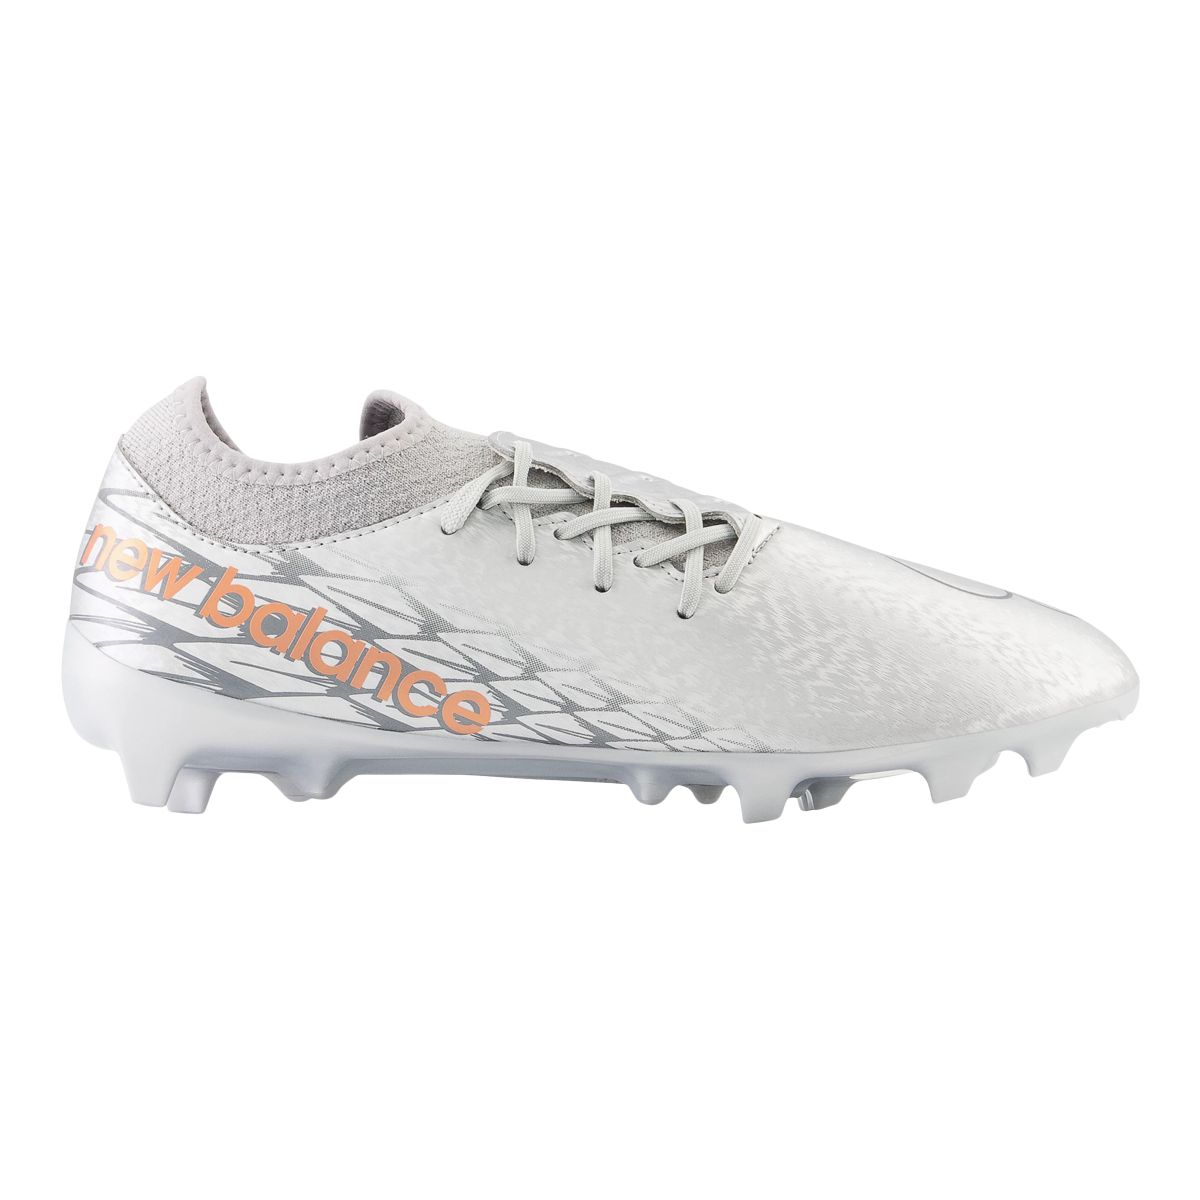 Image of New Balance Men's/Women's Furon V7 Dispatch Firm Ground Soccer Shoes/Cleats